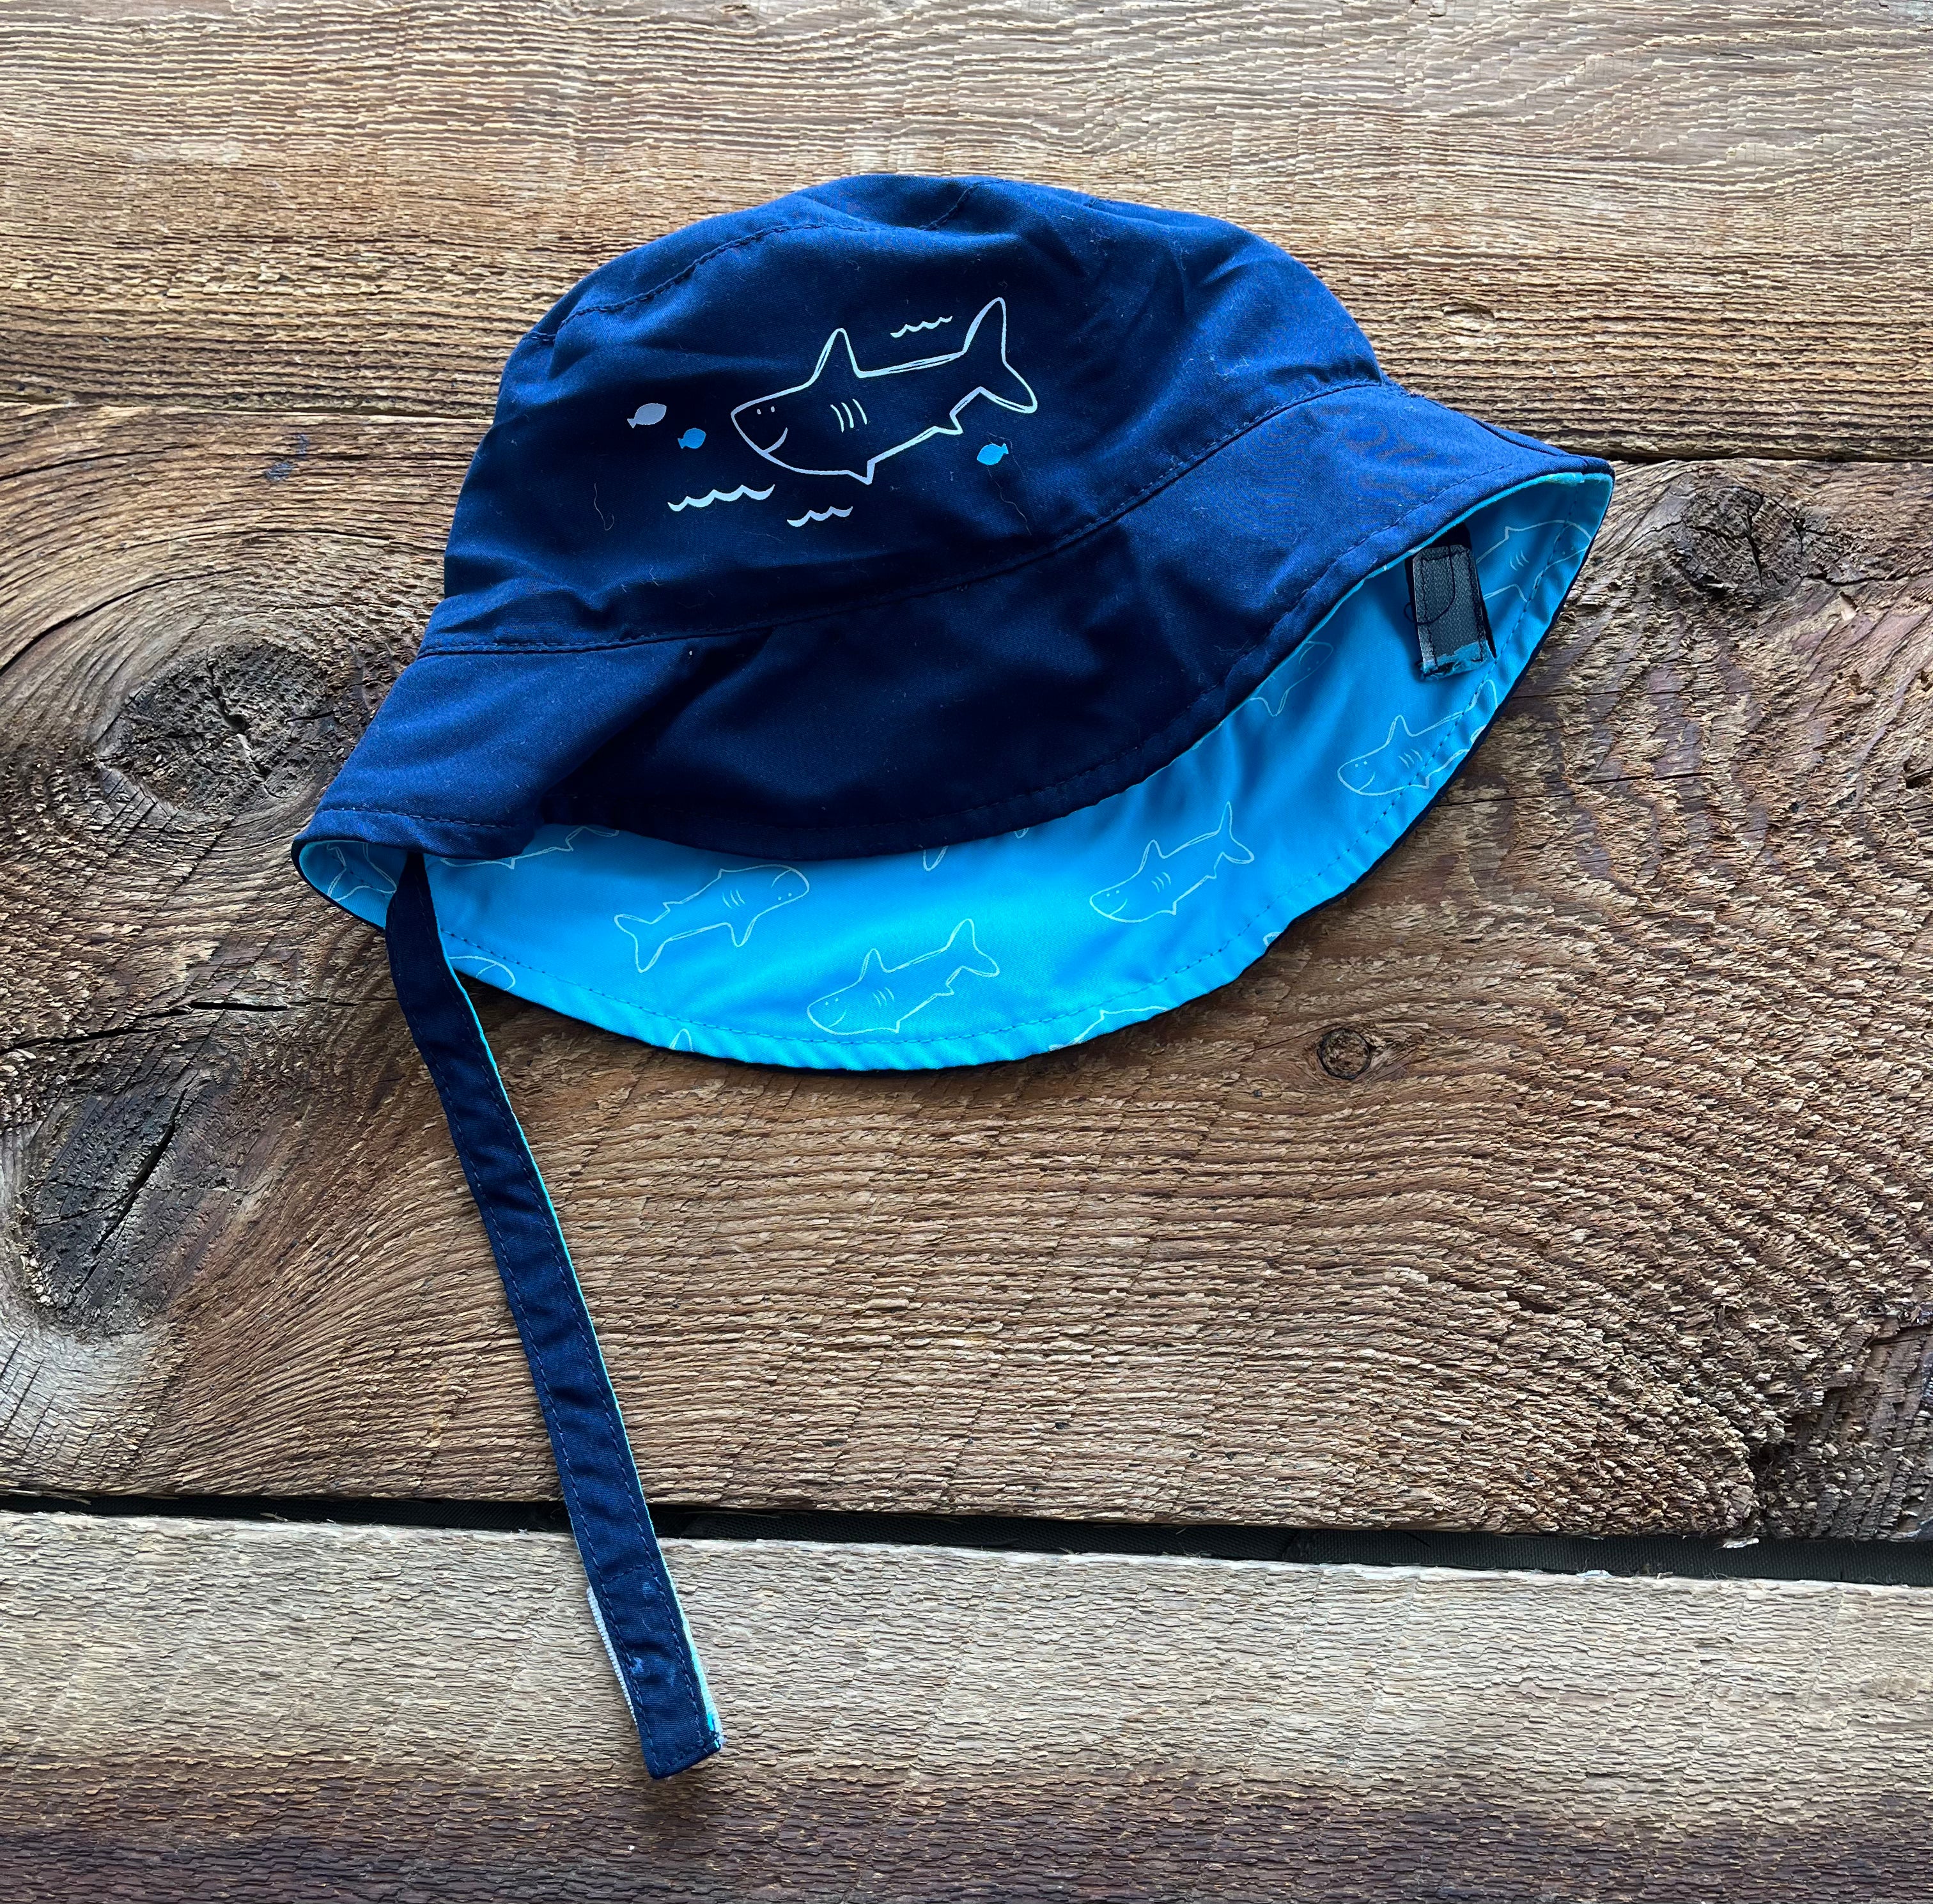 Columbia Youth Reversible Hat